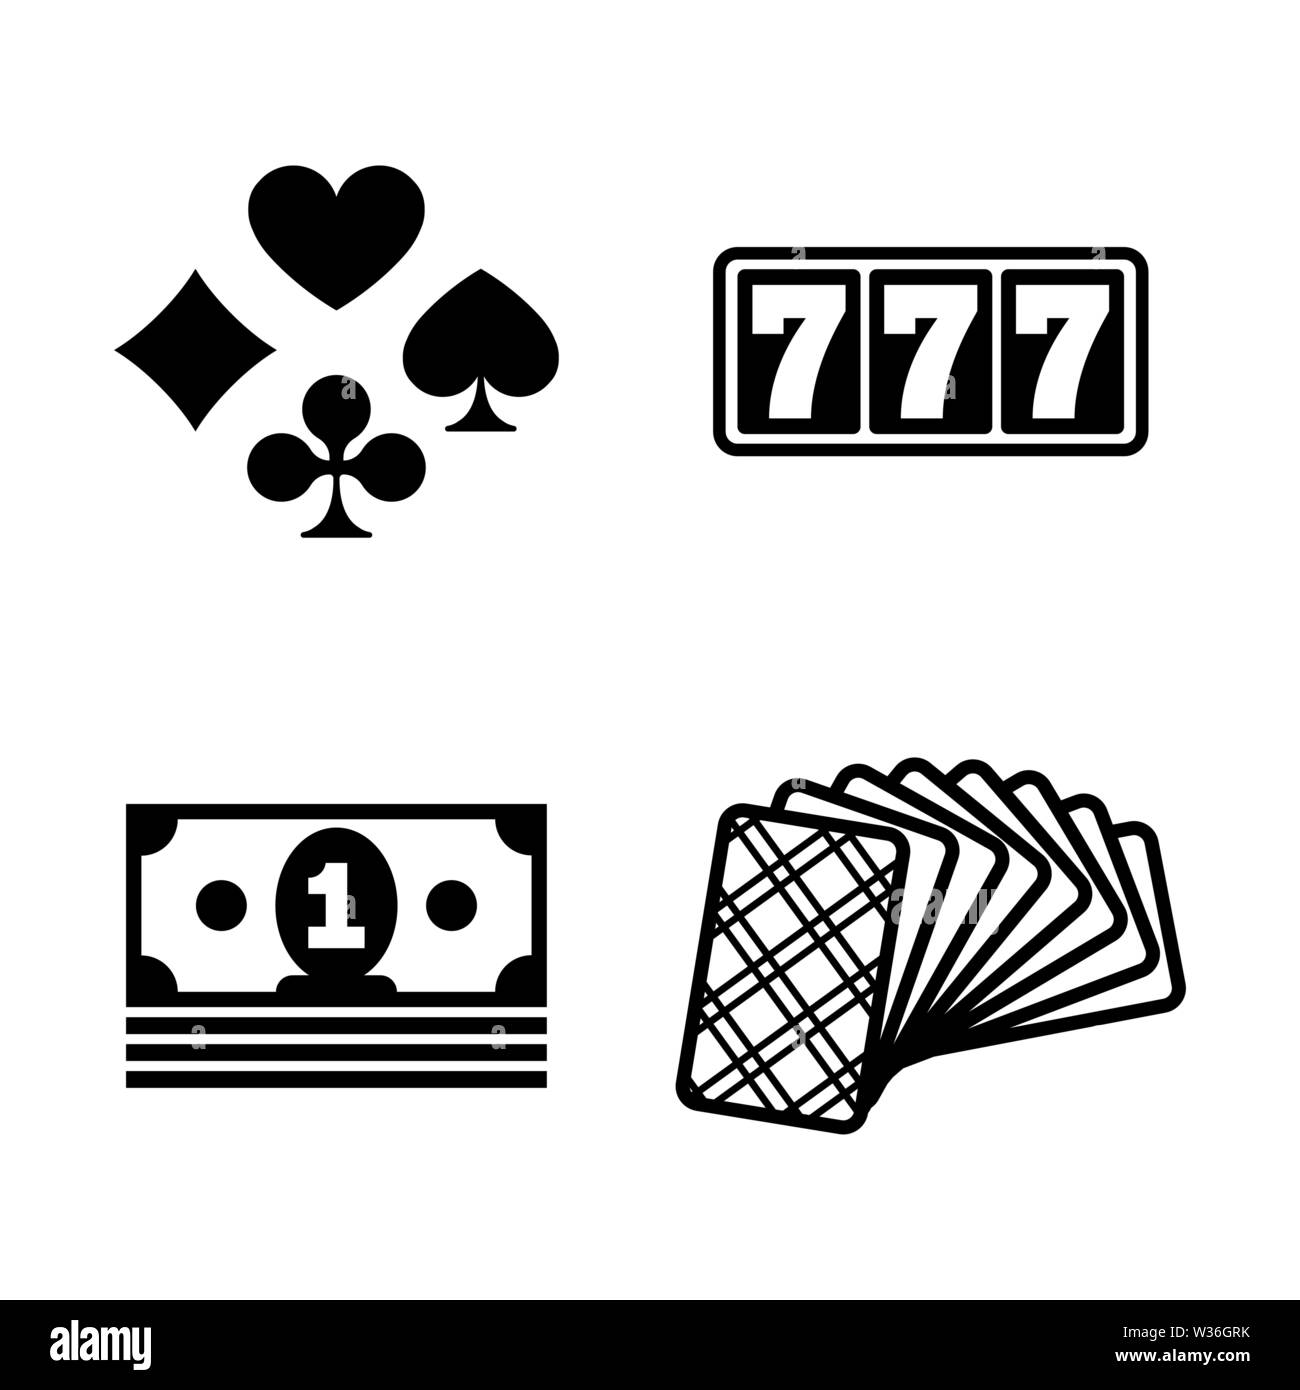 Jackpot. Simple Related Vector Icons Set for Video, Mobile Apps, Web Sites, Print Projects and Your Design. Black Flat Illustration on White Backgroun Stock Vector